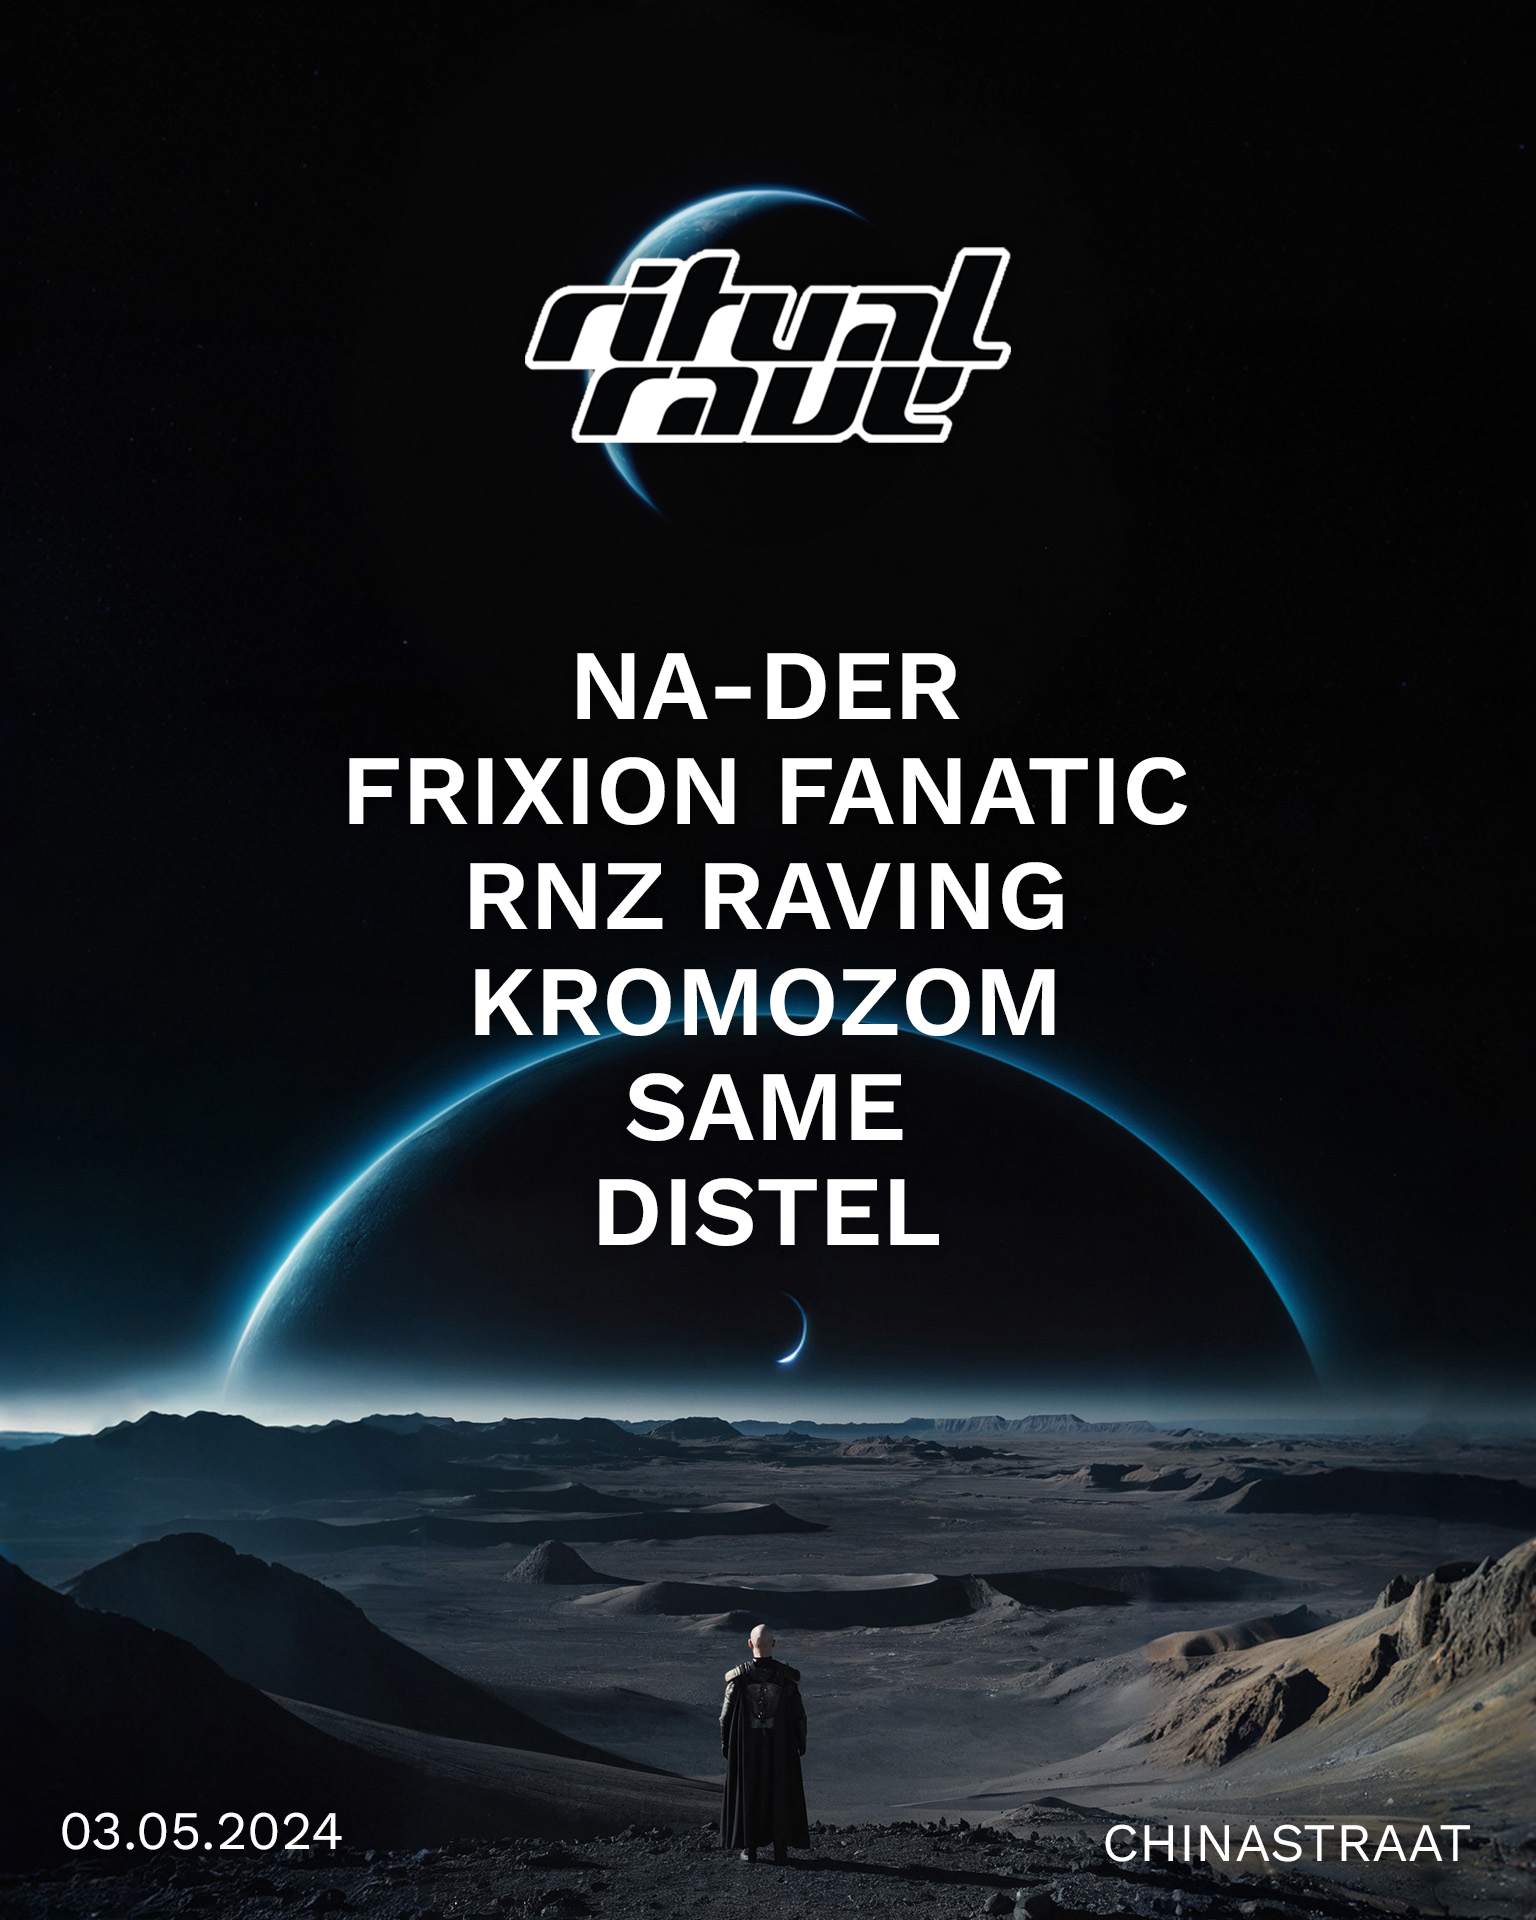 Ritual Rave: Lunar Labyrinth with Na-Der, Frixion Fanatic, RNZ Raving - フライヤー裏